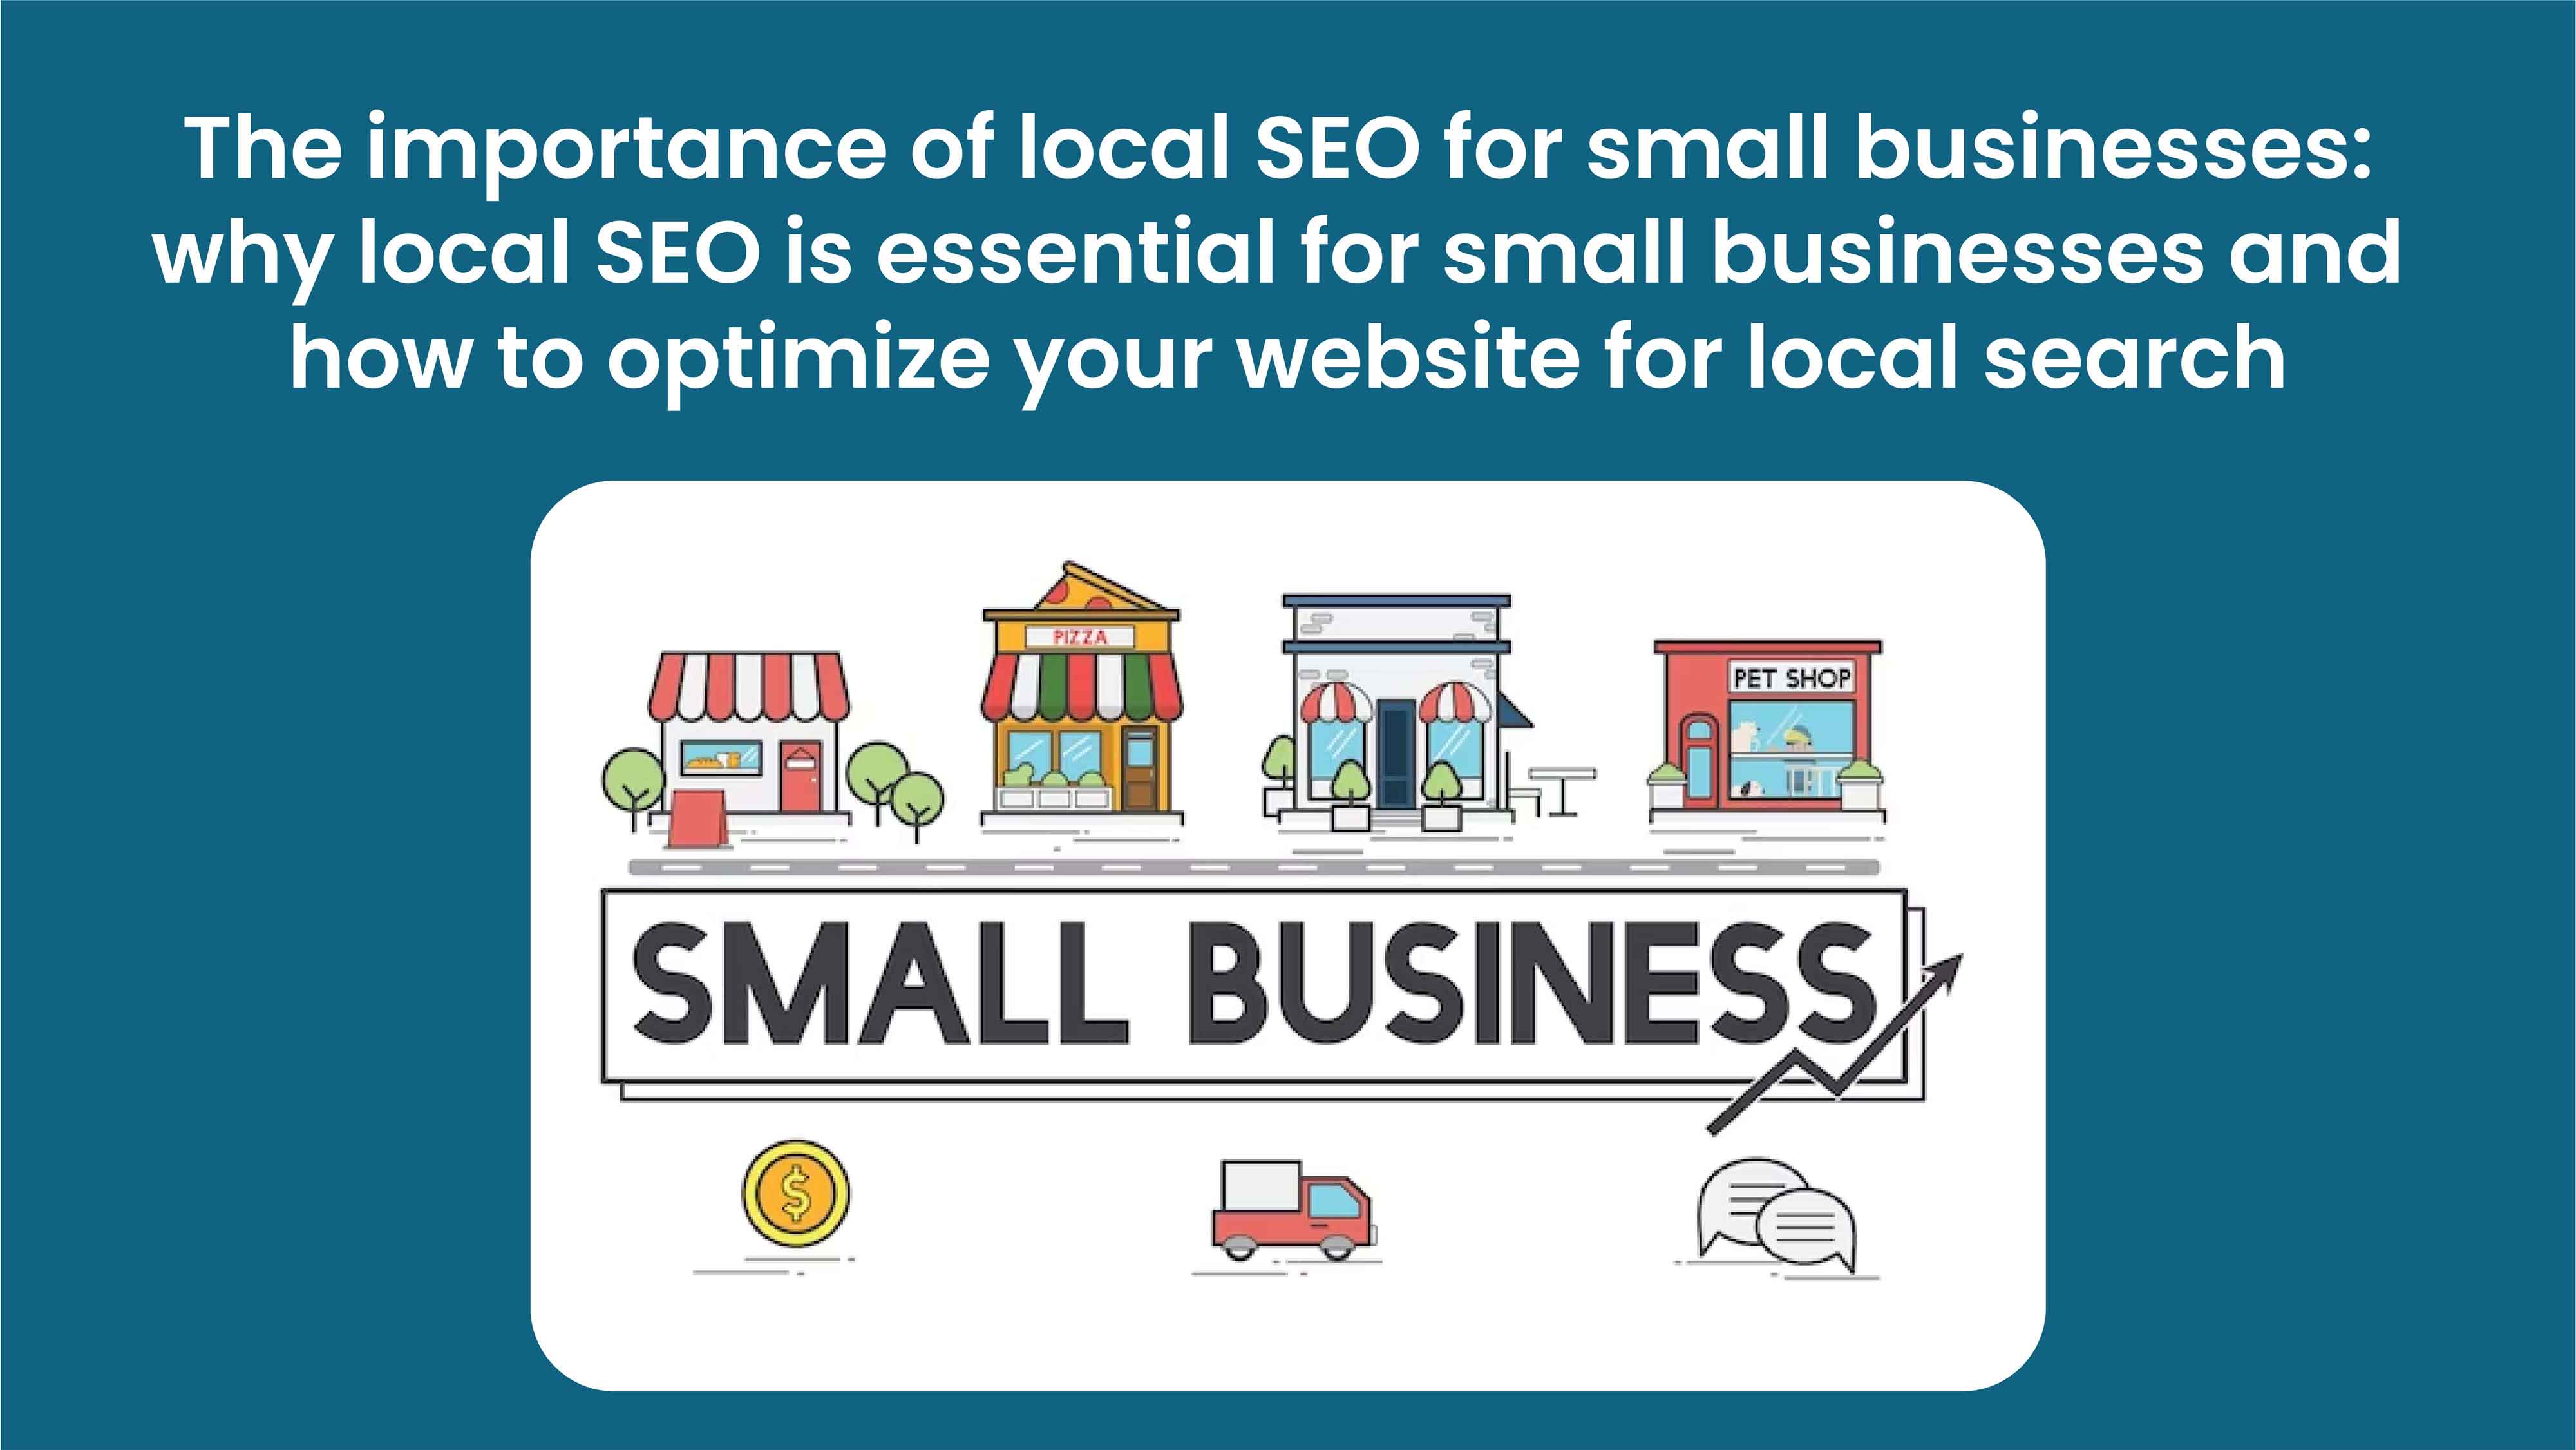 Importance of local SEO for small businesses